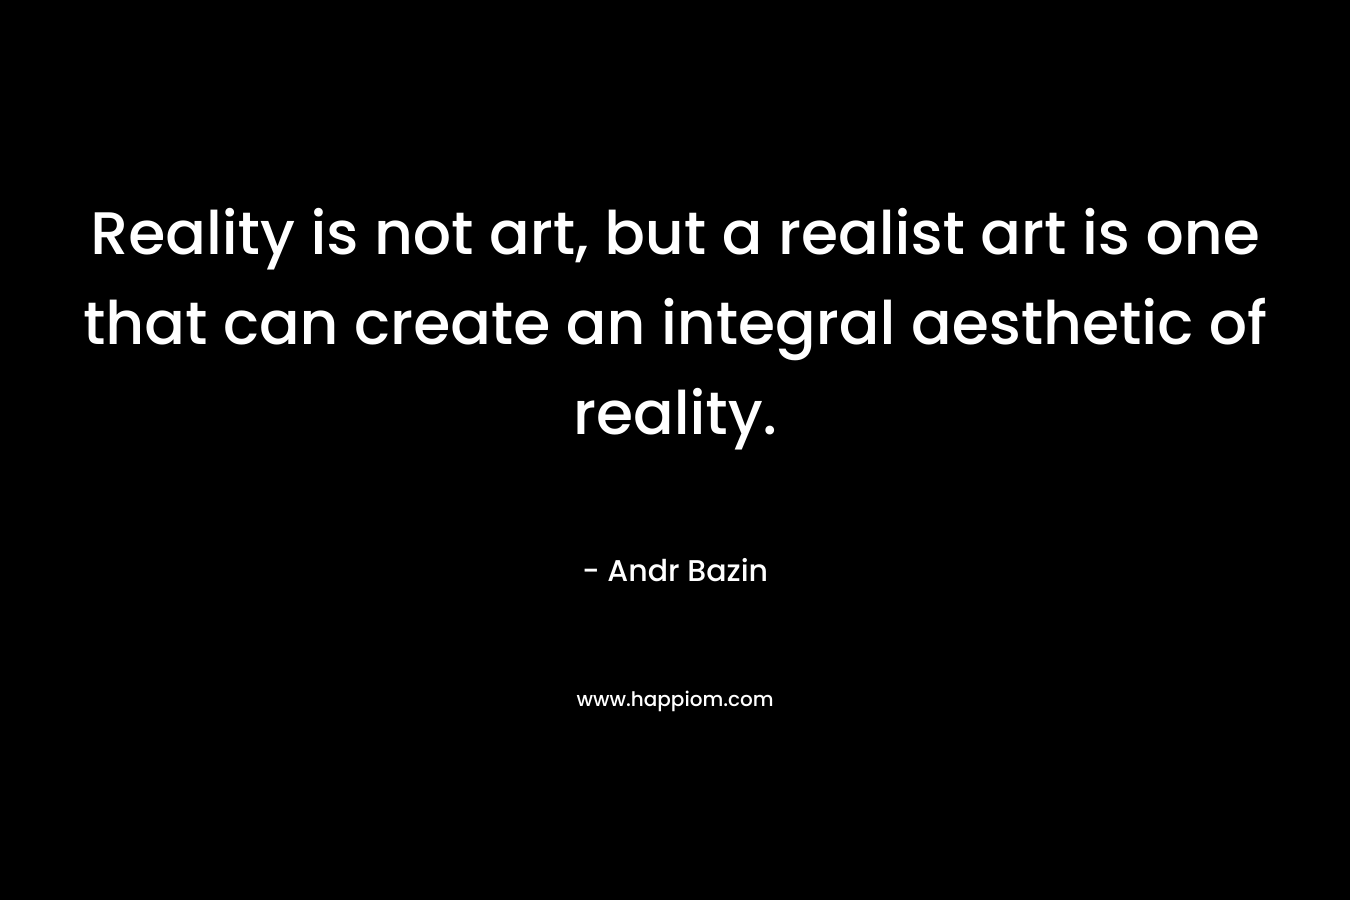 Reality is not art, but a realist art is one that can create an integral aesthetic of reality.